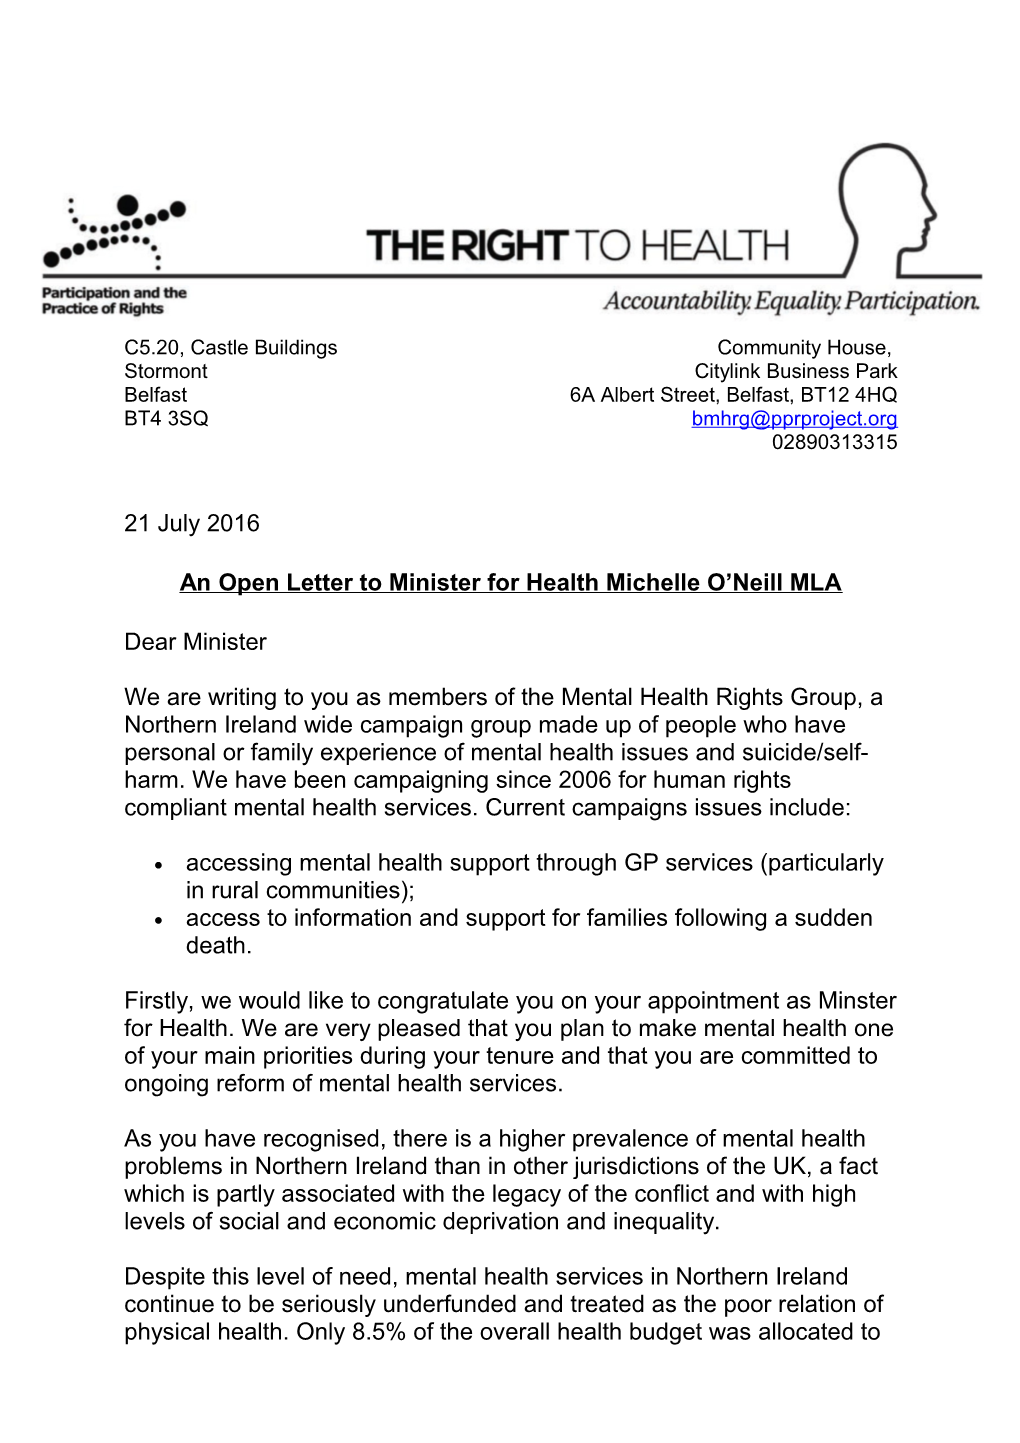 An Open Letter to Minister for Health Michelle O Neill MLA